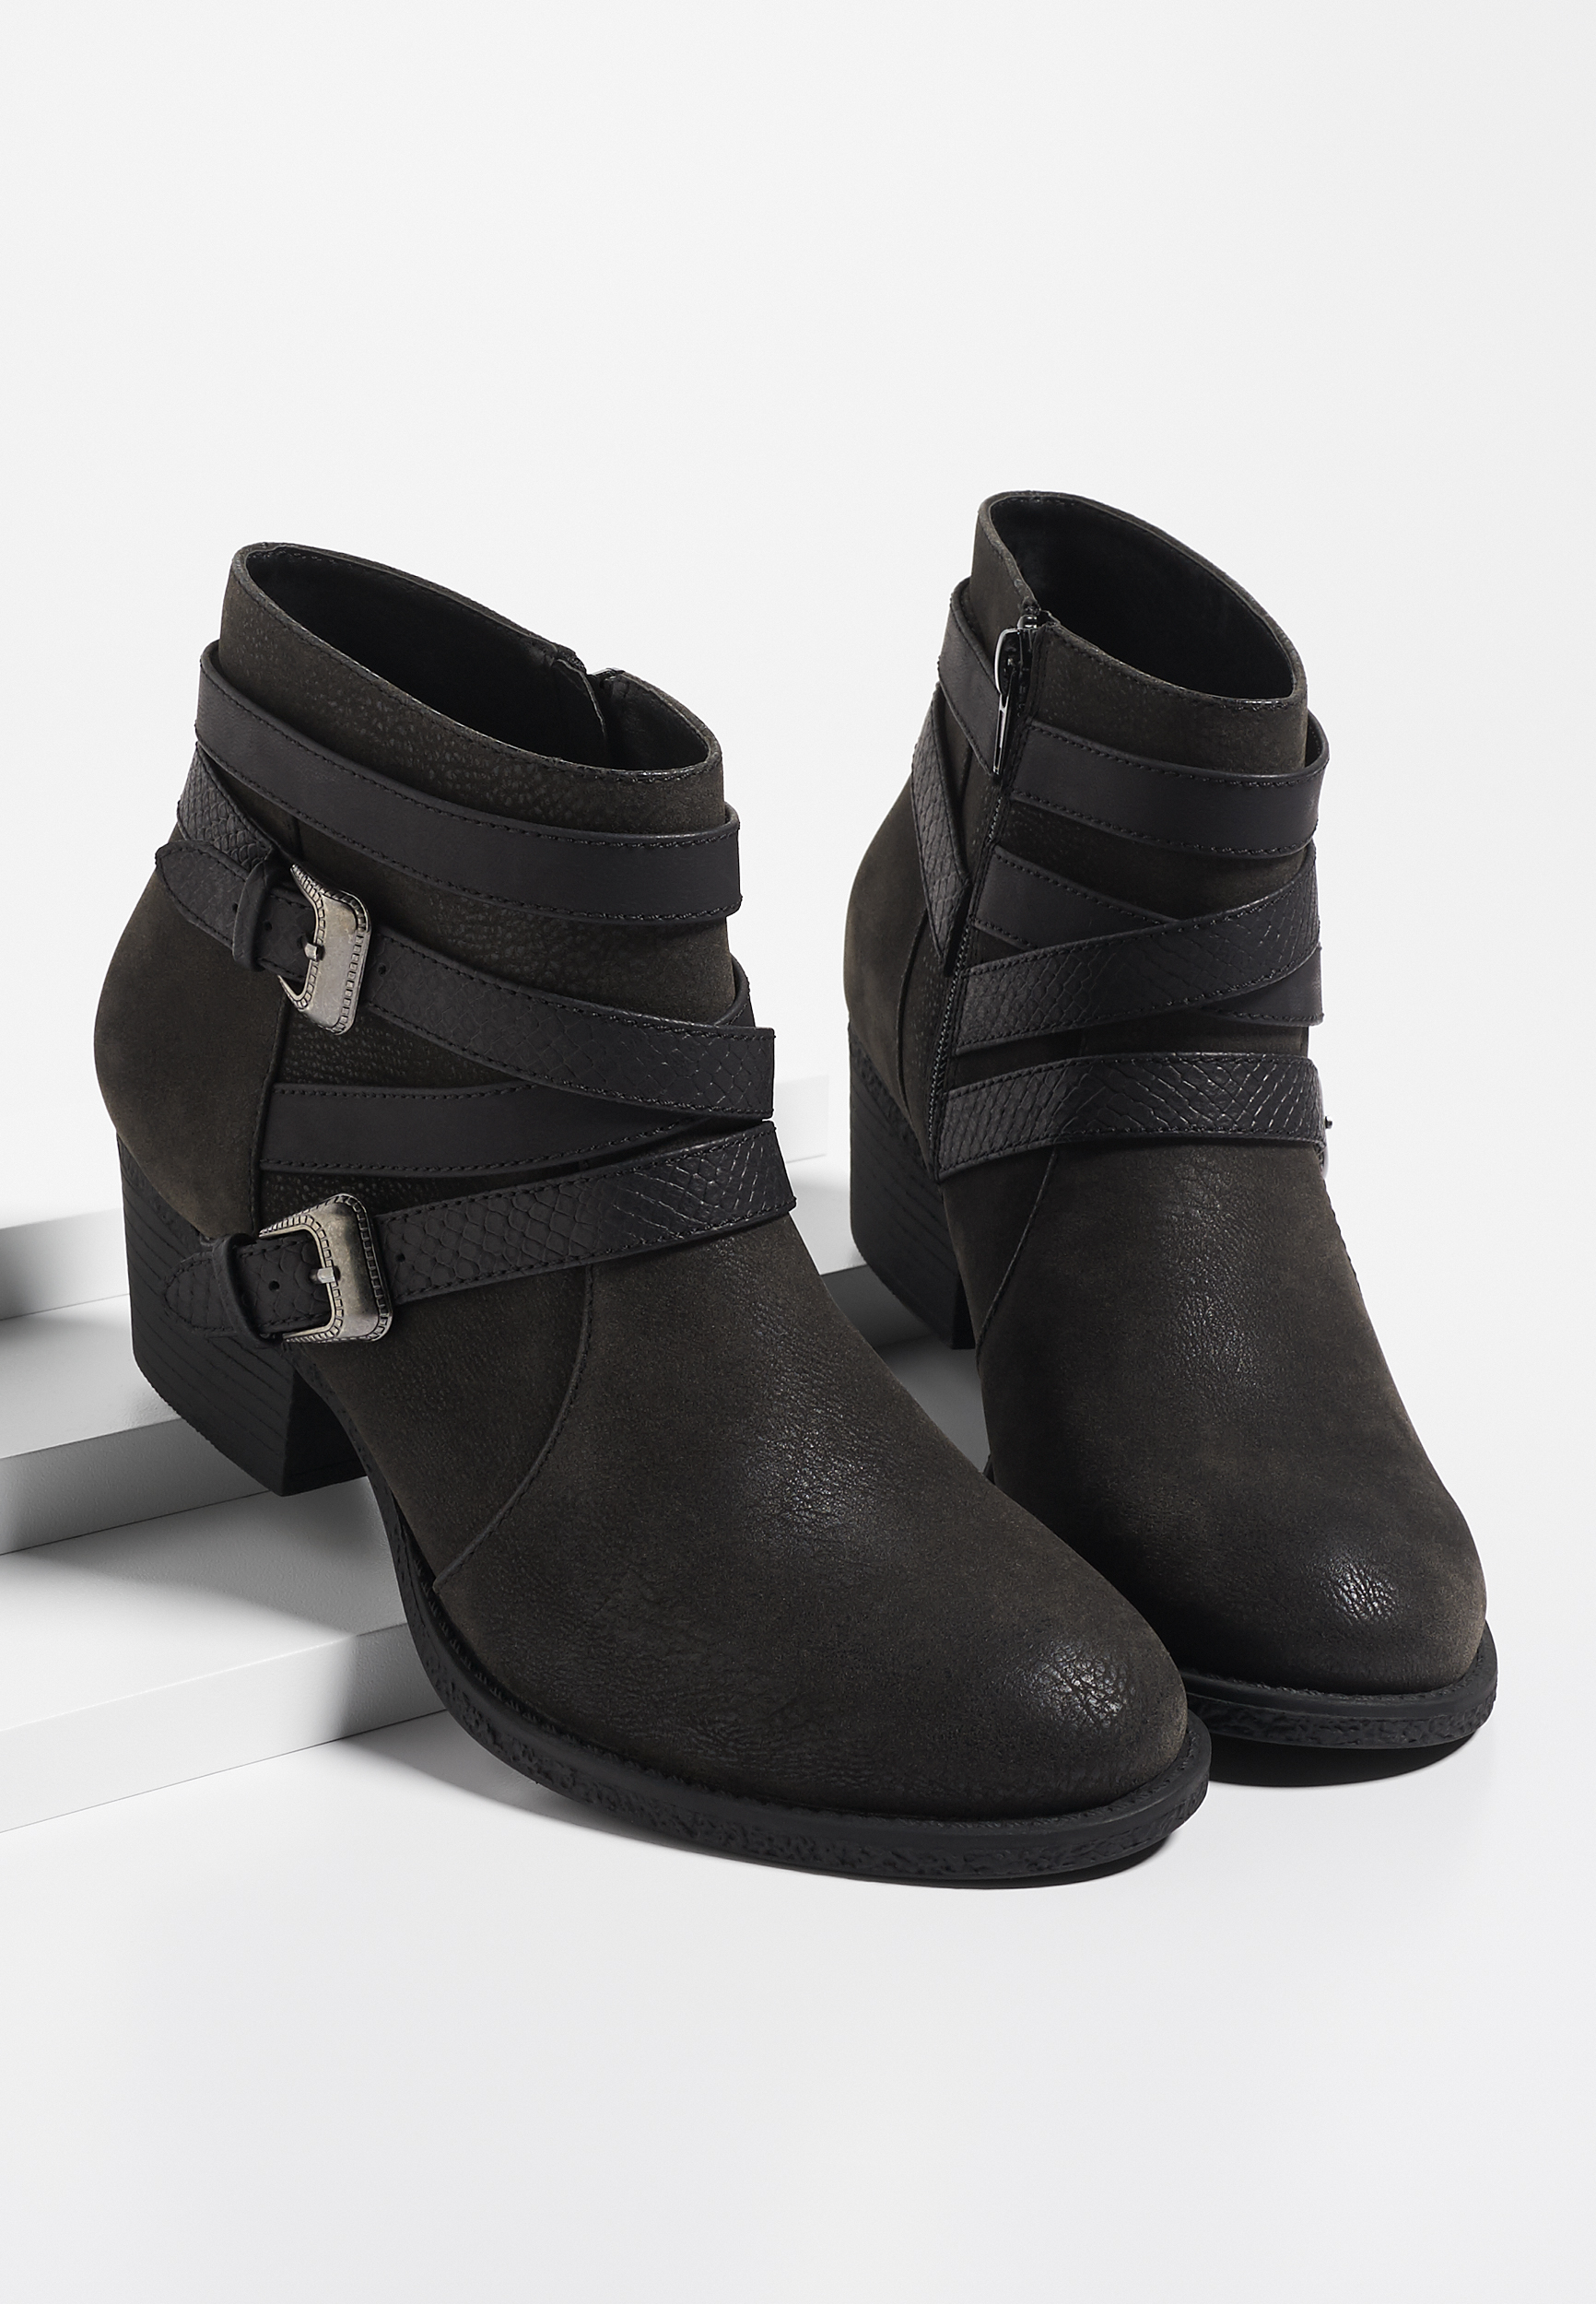 Remi western buckle wrap bootie | maurices